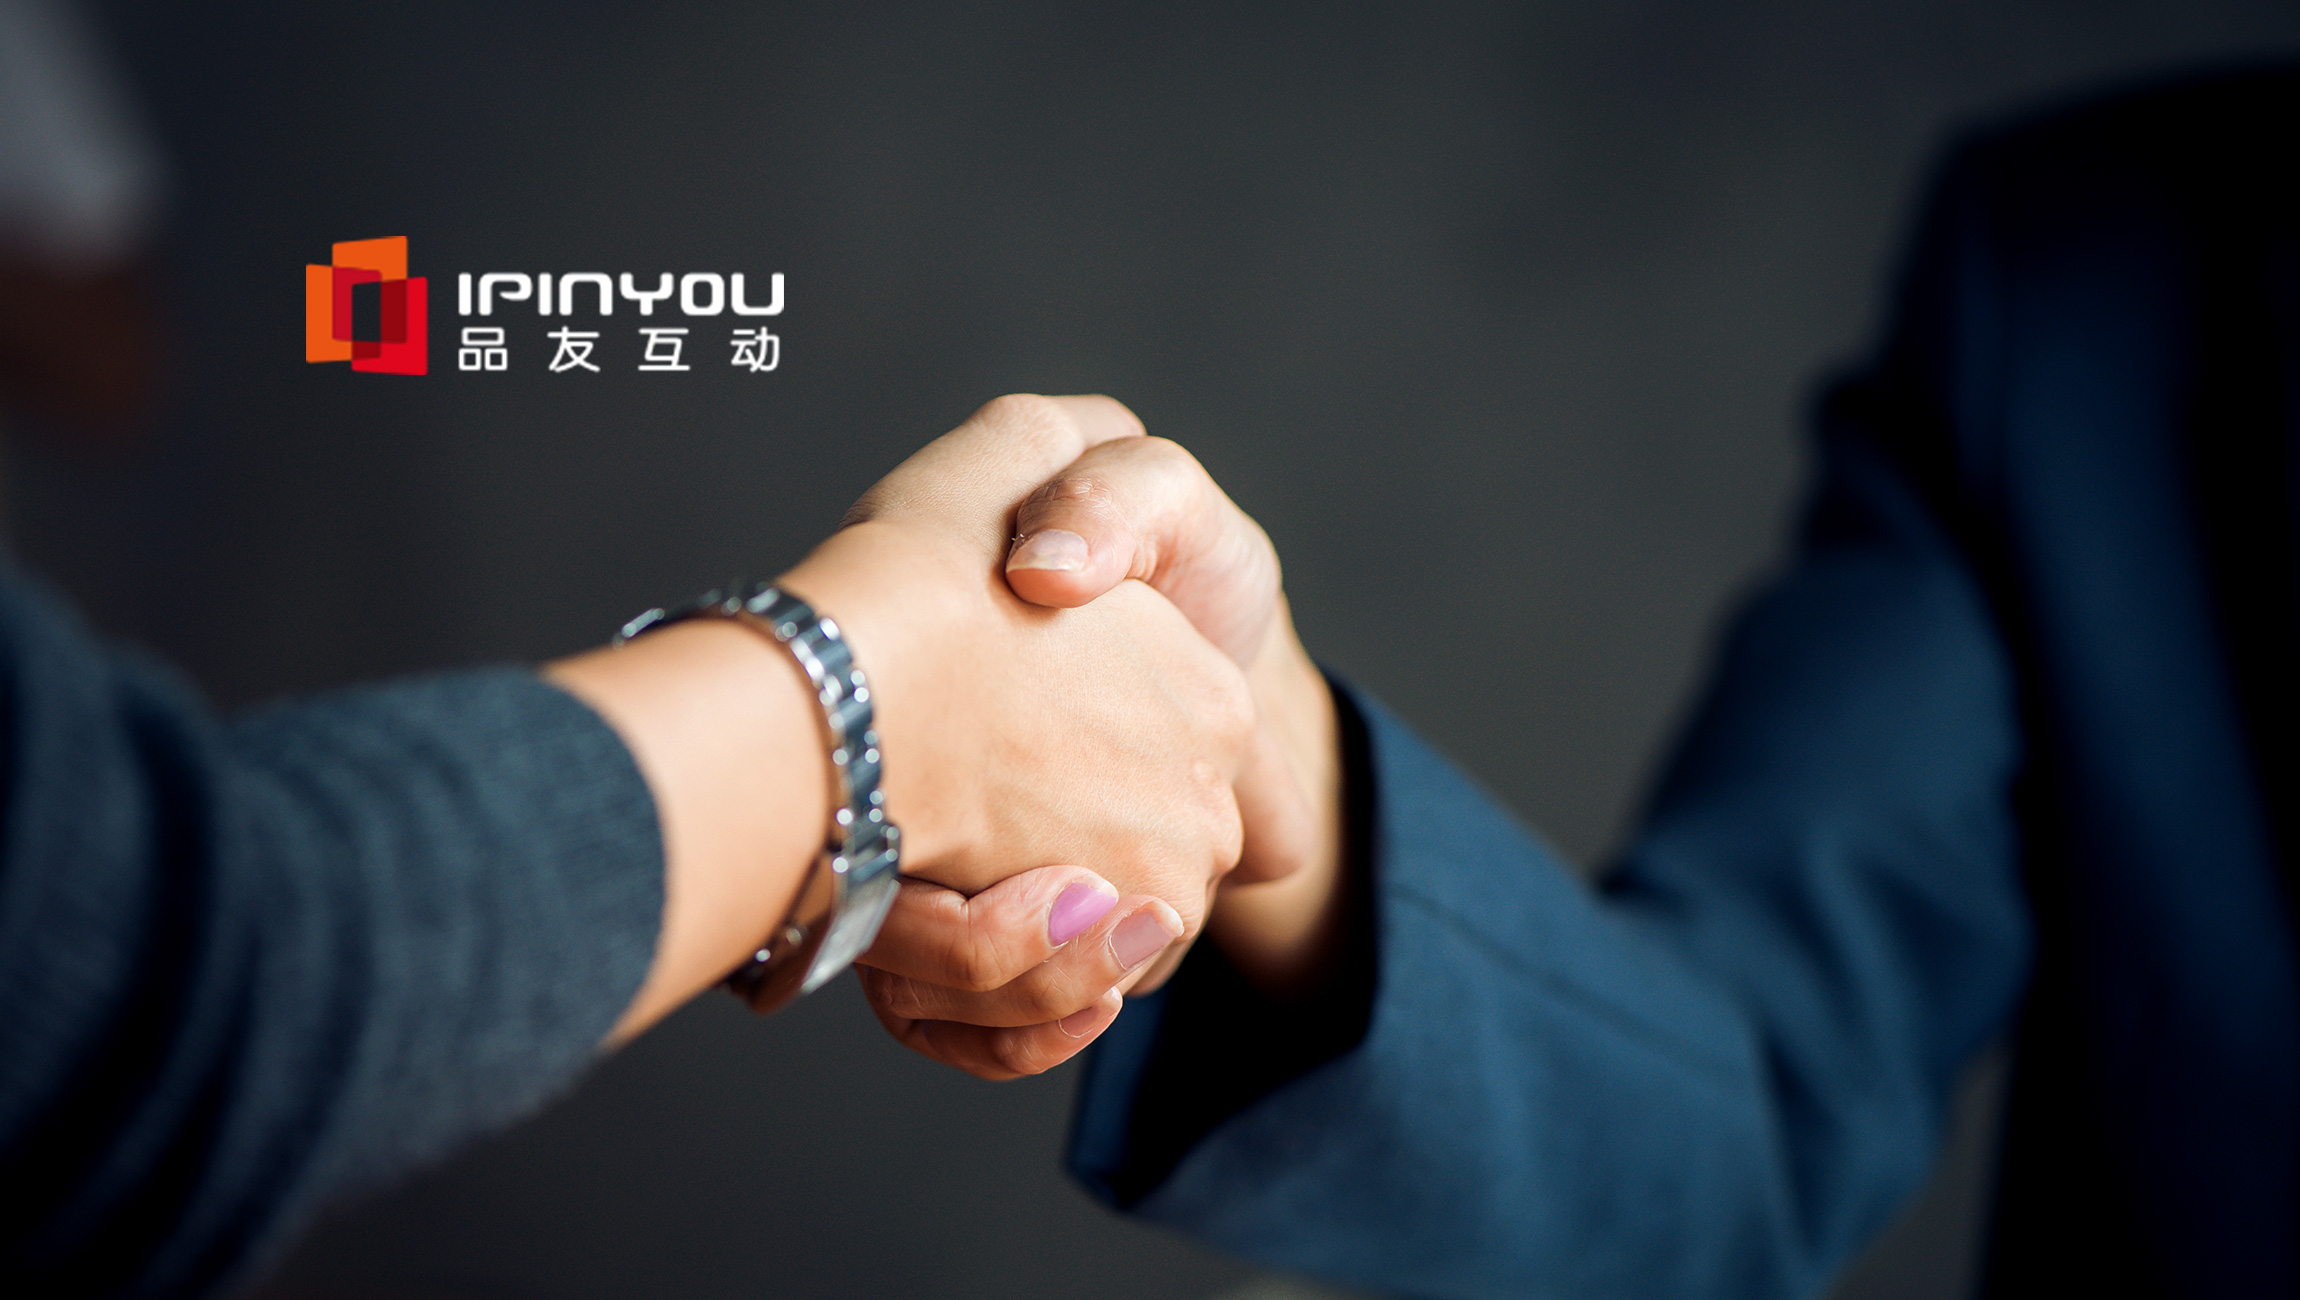 iPinYou Partners with Weibo to Provide a More Integrated Advertising Solution across Social and Programmatic Platforms